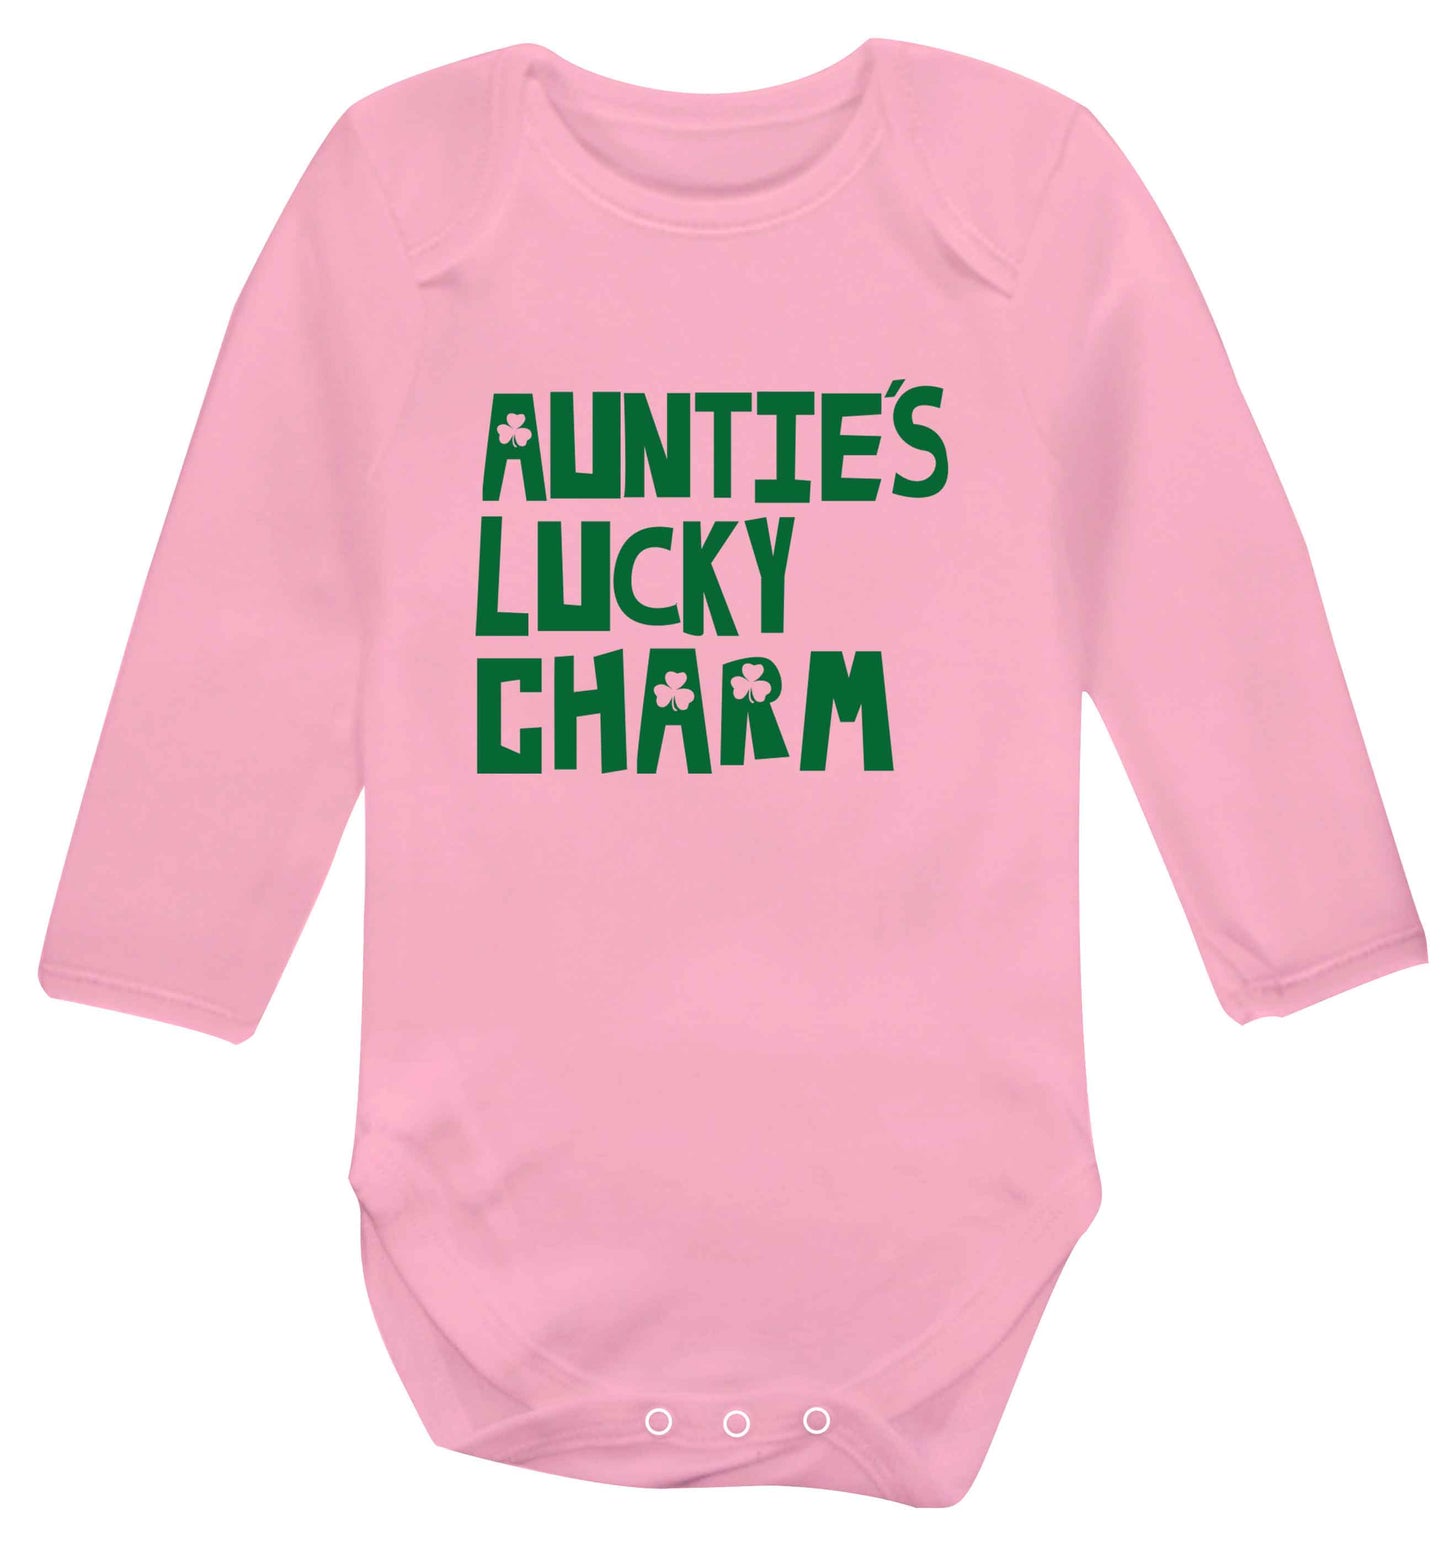 Auntie's lucky charm baby vest long sleeved pale pink 6-12 months